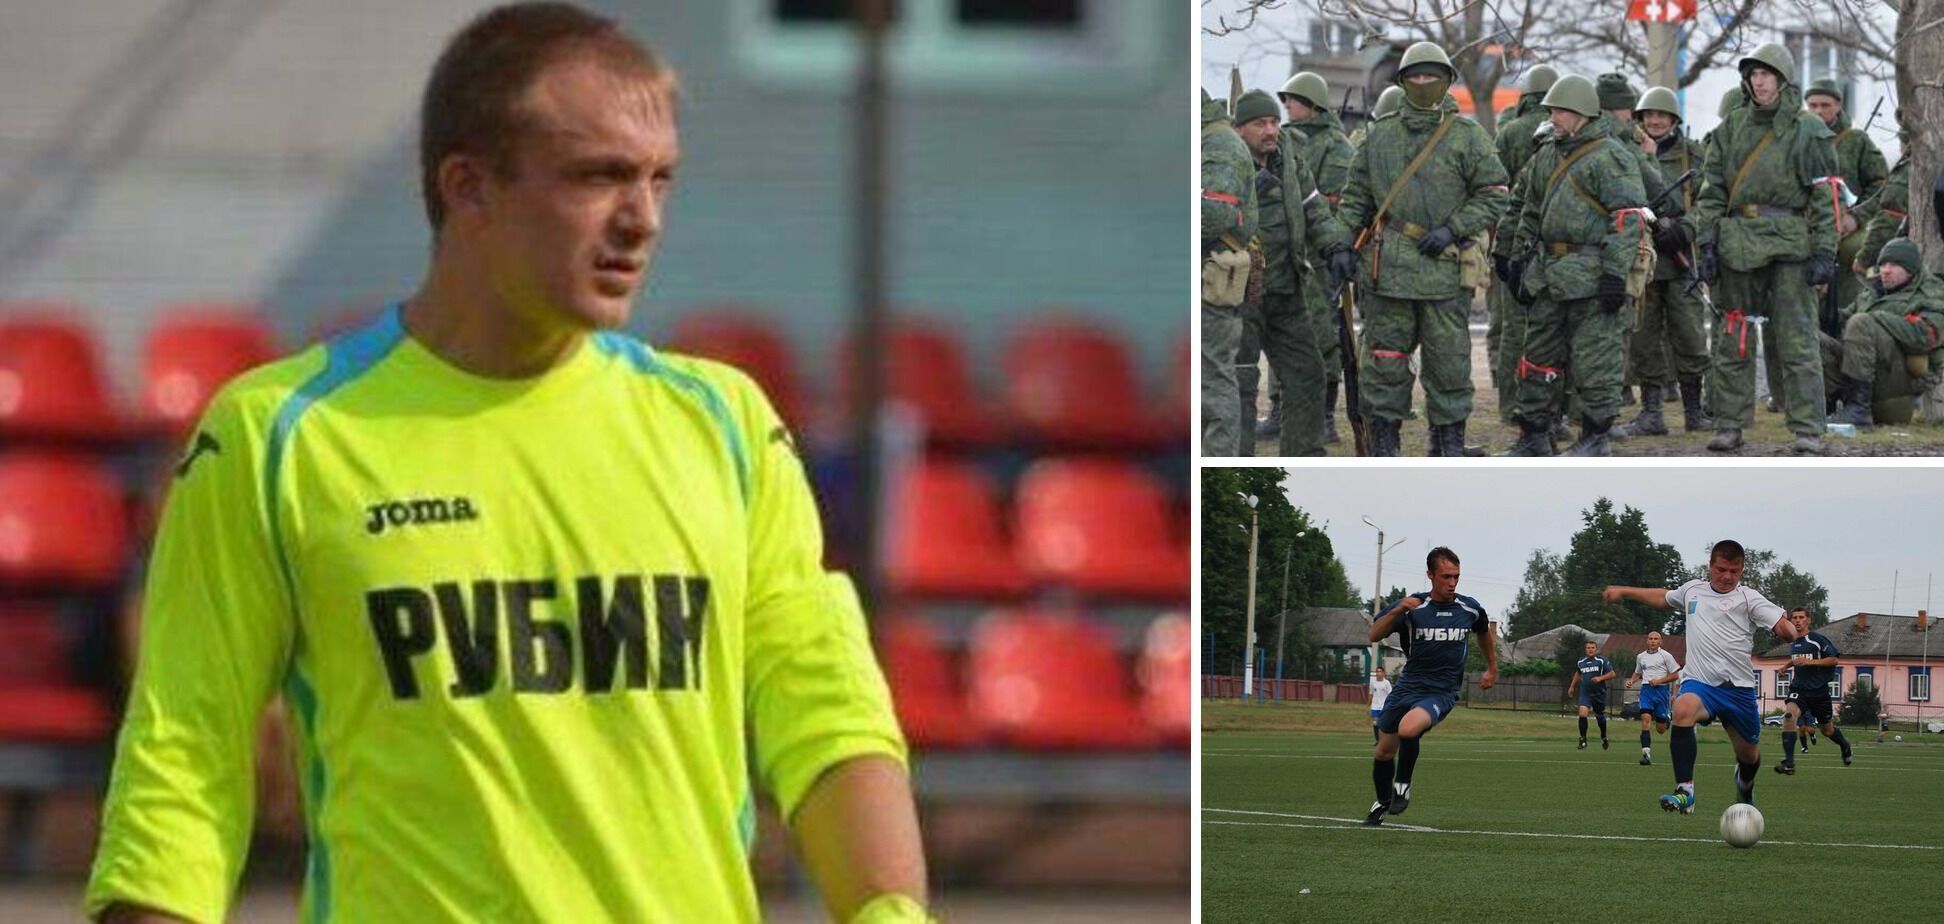 Russian hockey player came to kill Ukrainians and was eliminated by the AFU